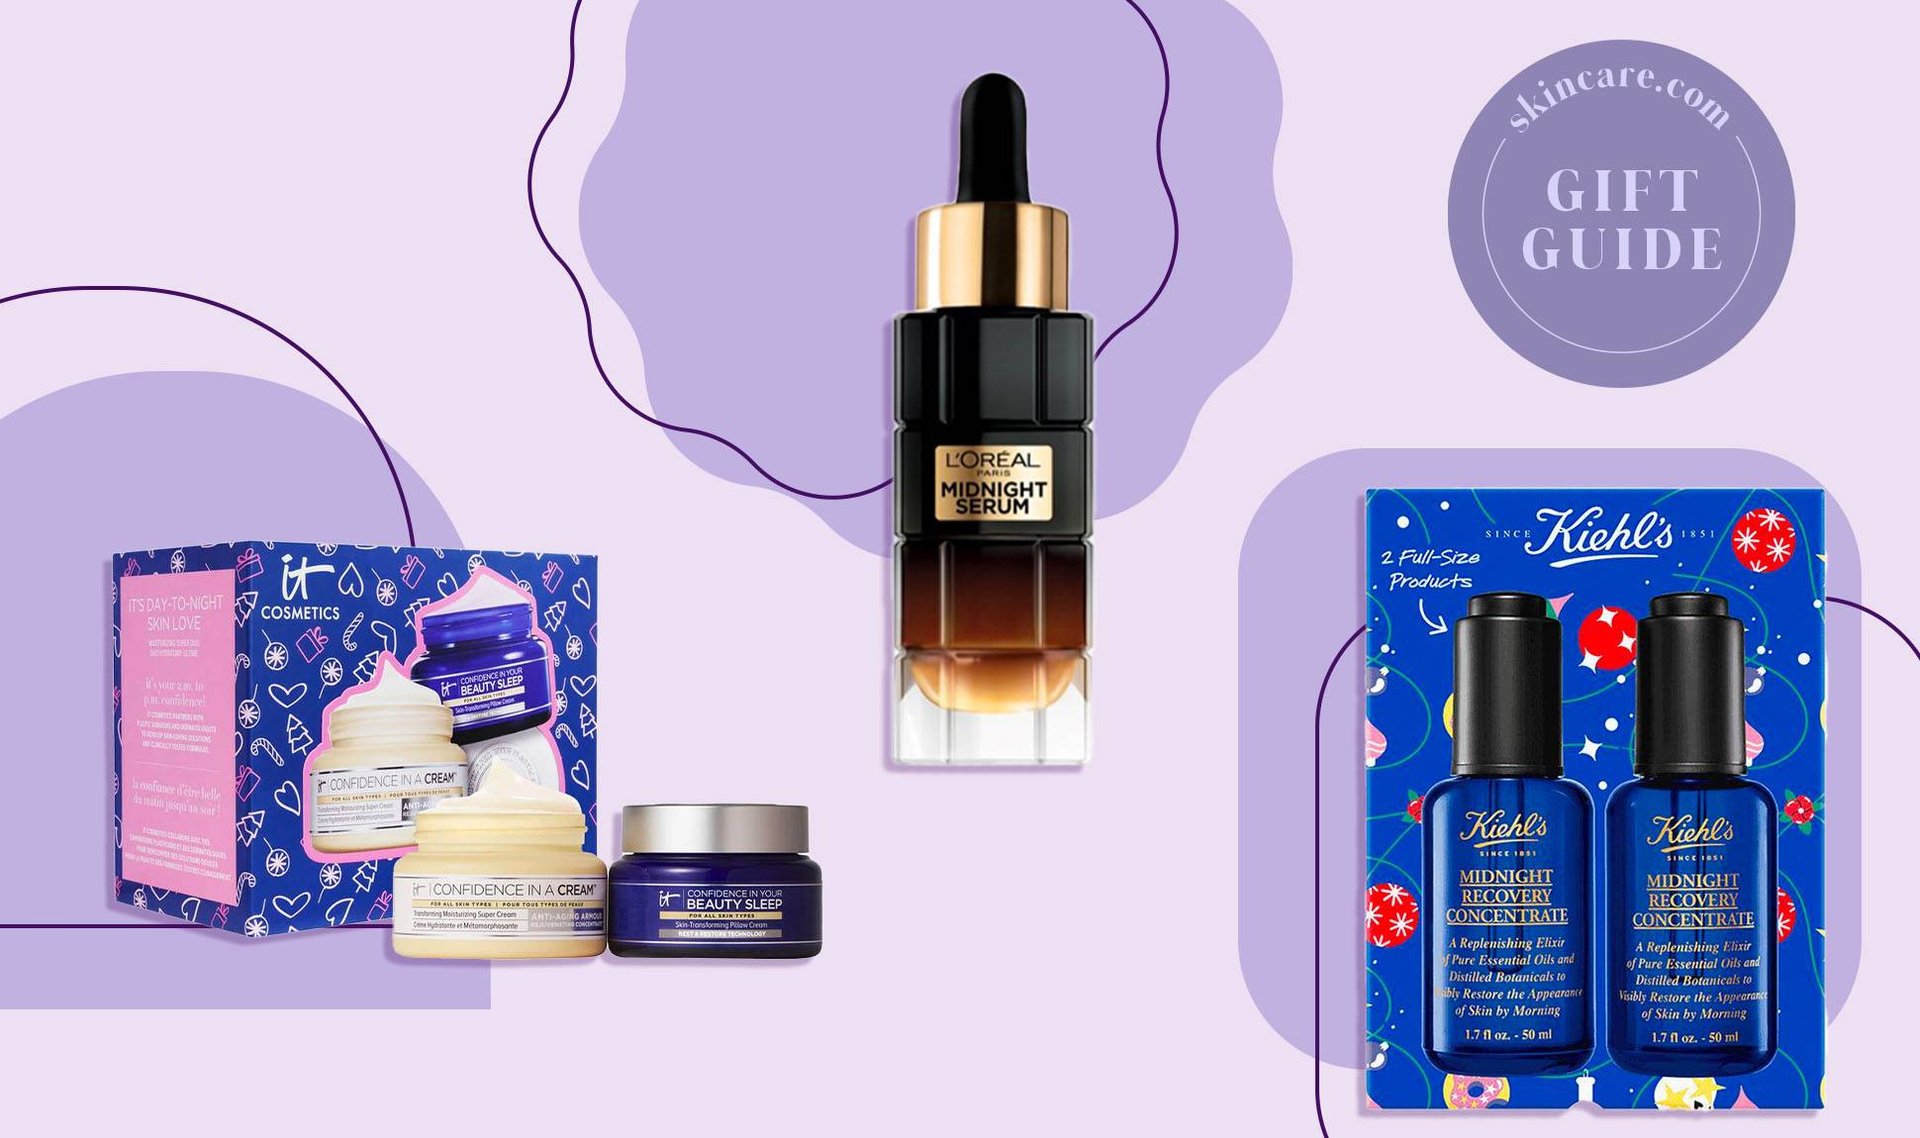 Sweet Dreams Are Made of These: 6 Overnight Skincare Products to Gift